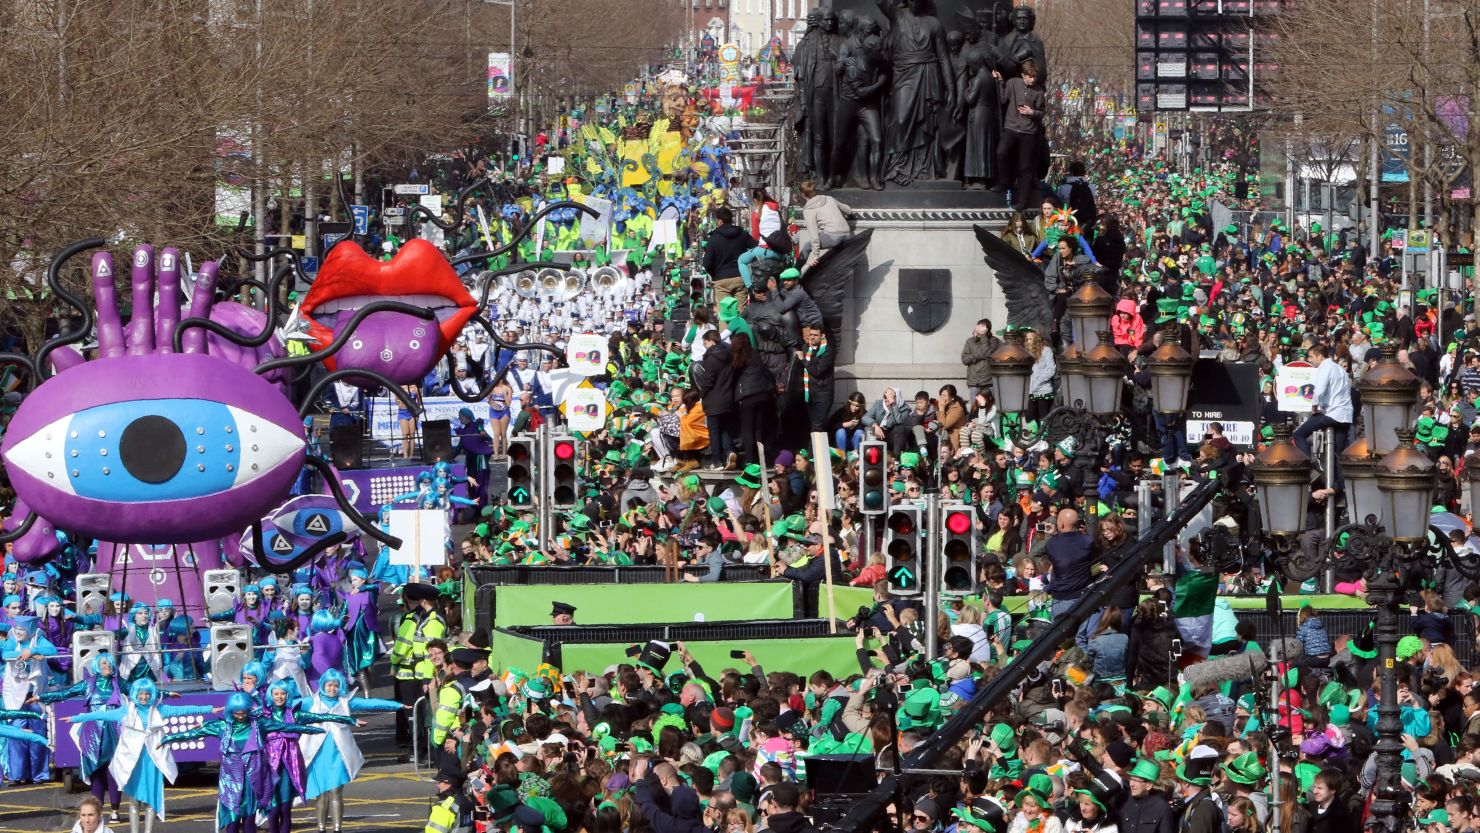 Dublin's massive St. Patrick's Day parade won't happen this year, local officials announced. It was canceled as a preventative measure against the novel coronavirus. 